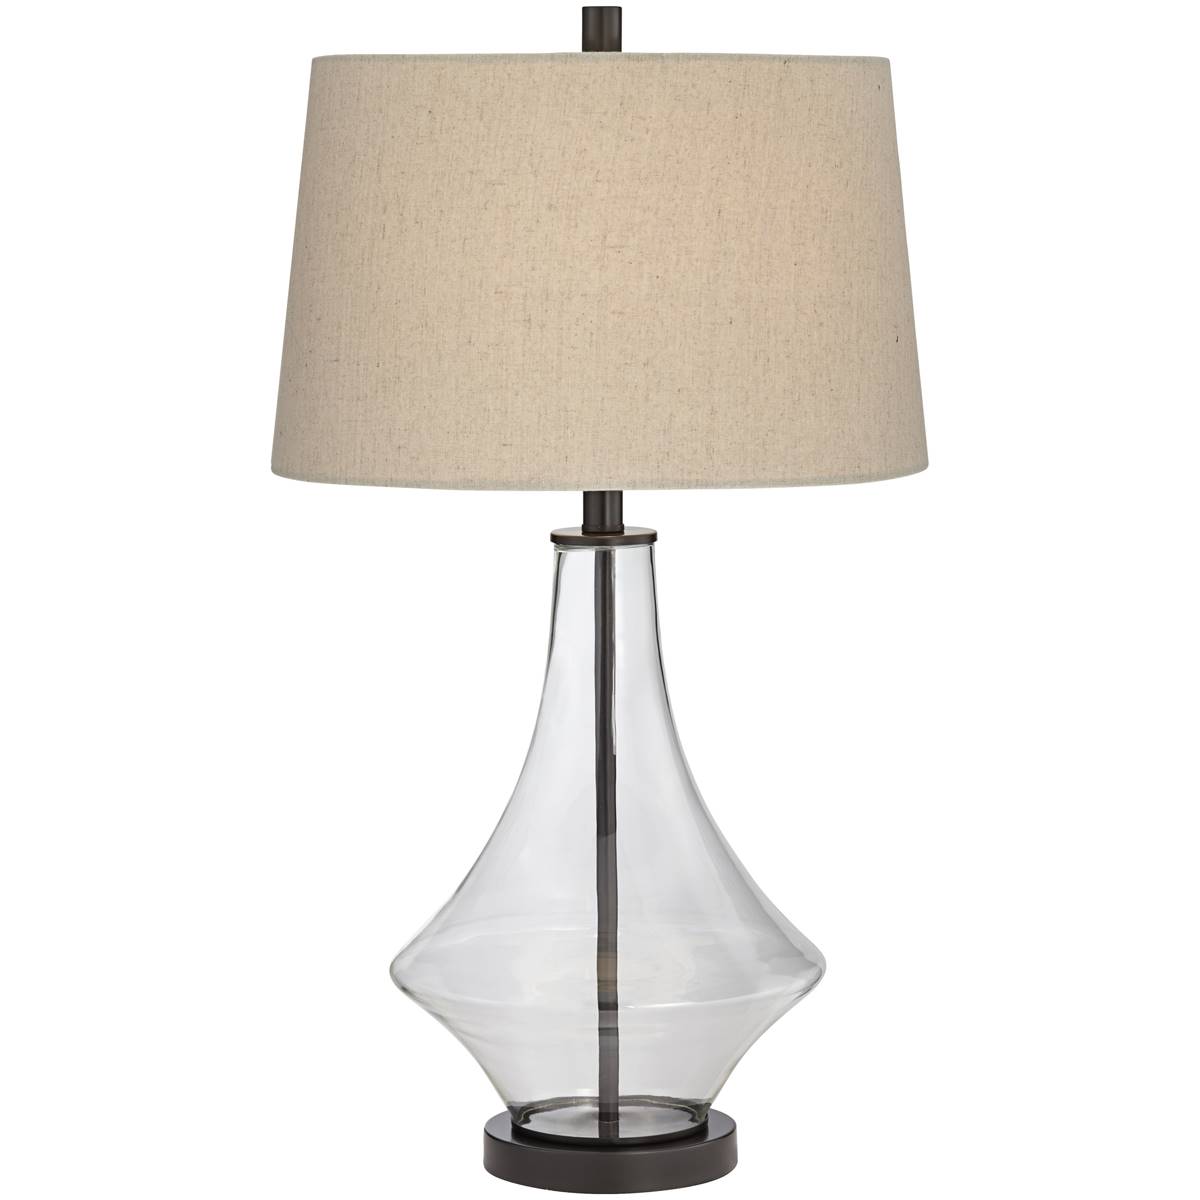 Pacific Coast Lighting Stingray 28in. Clear Glass Table Lamp